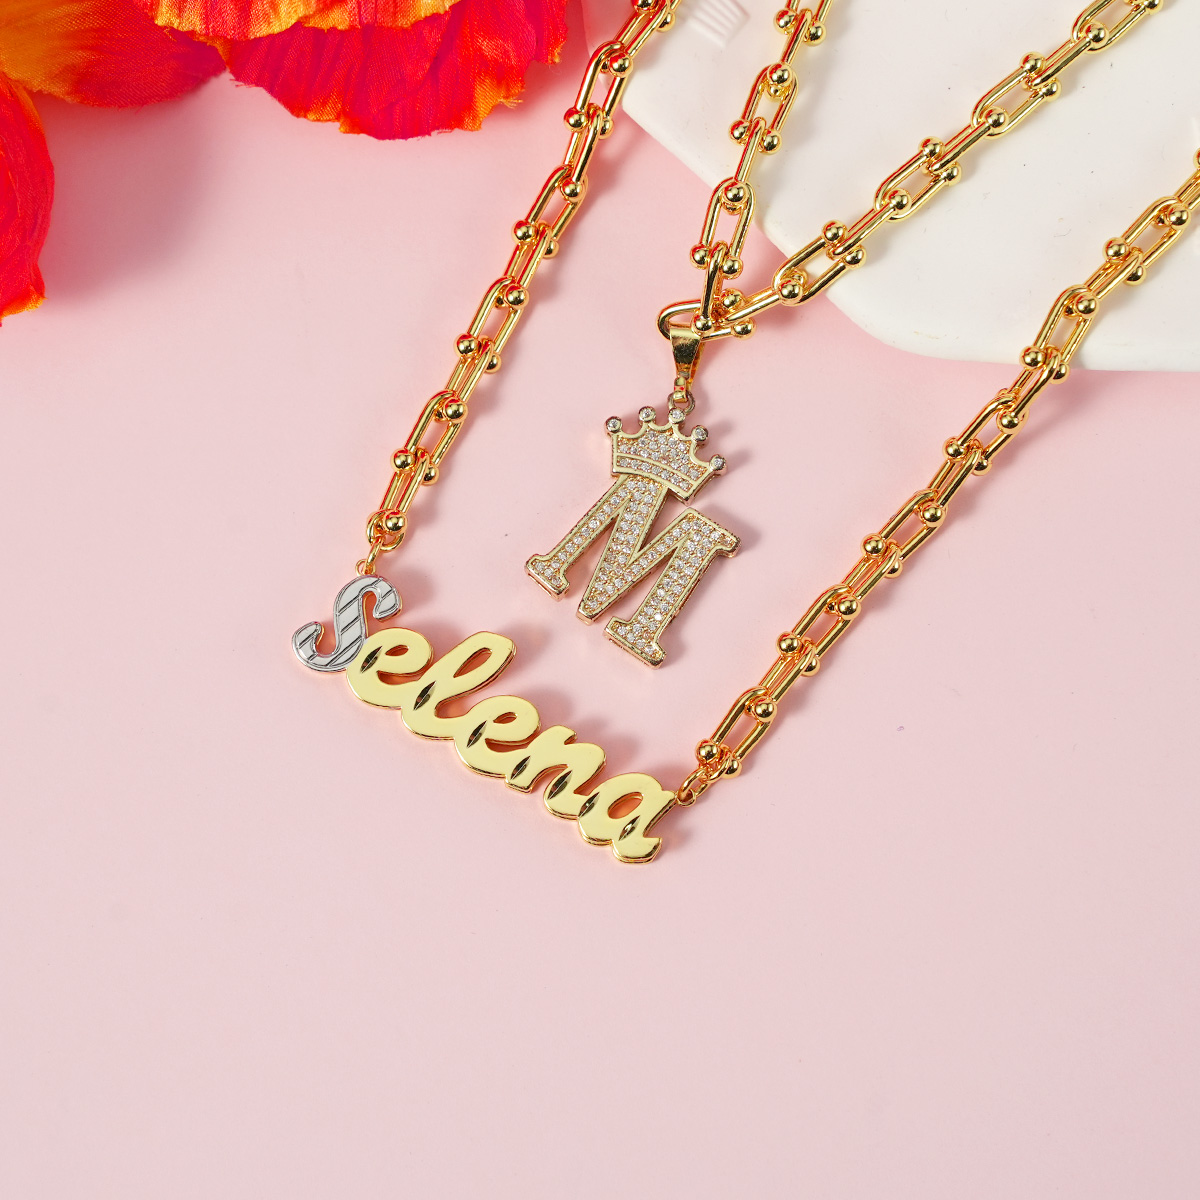 U-Shaped Lock Chain Personalized Name Necklace And Initial Necklace Set